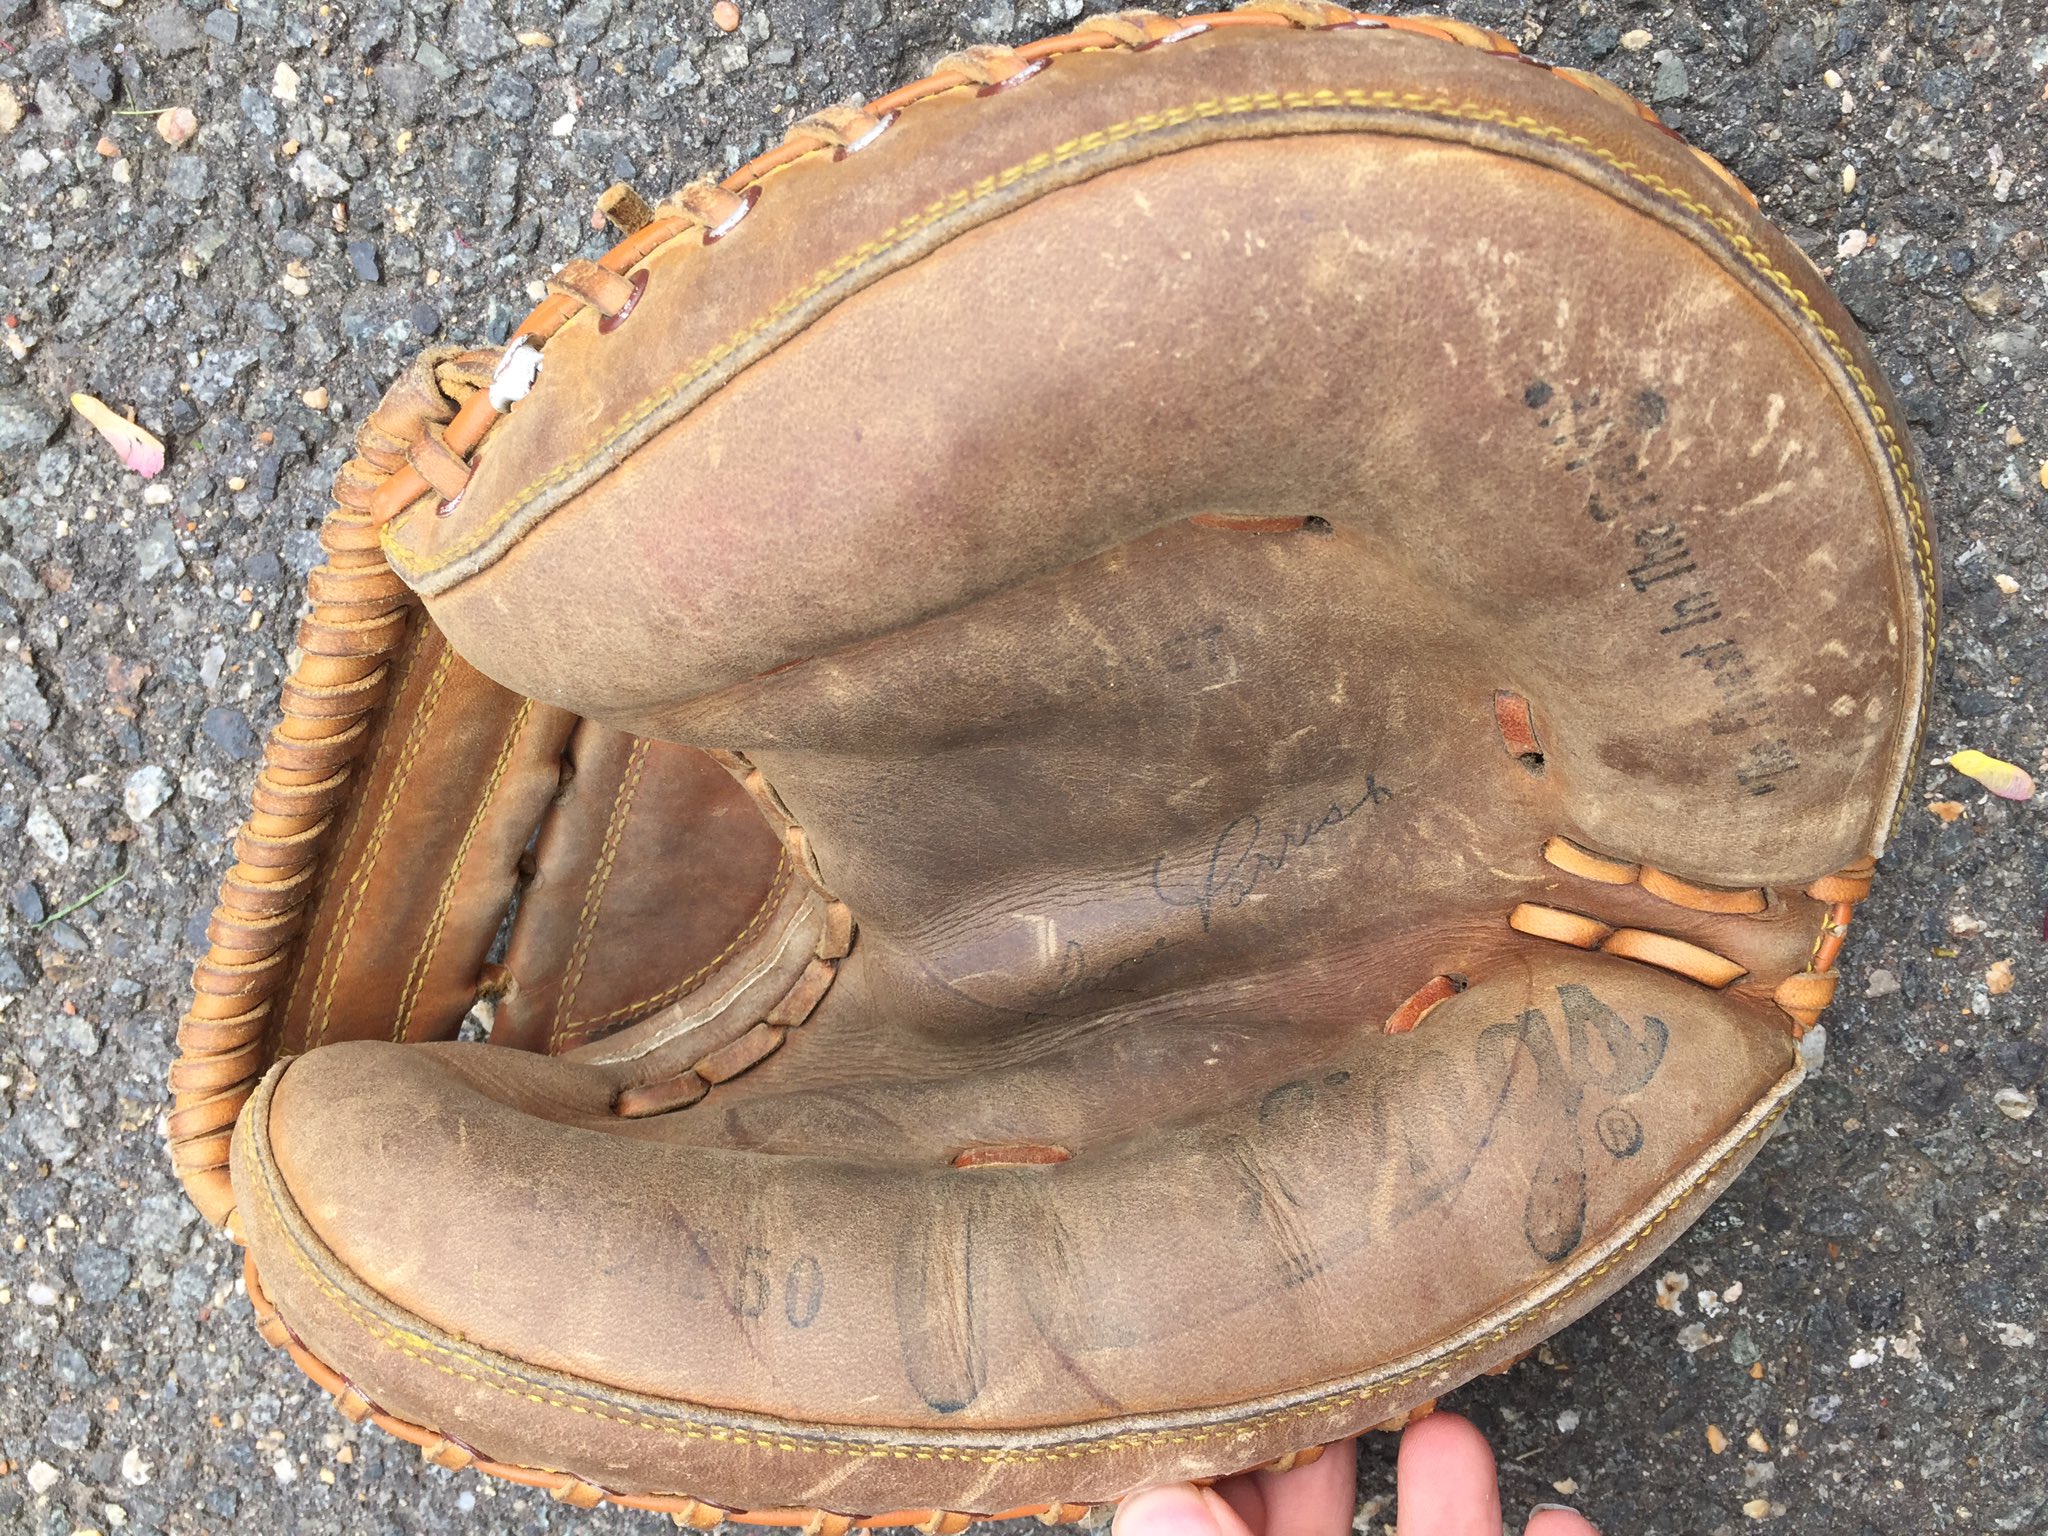 Darren Rovell on X: Broke out the gloves this morning. My Lance Parrish  catcher's mitt from 1989 and my Keith Hernandez 1st base glove from 1991   / X